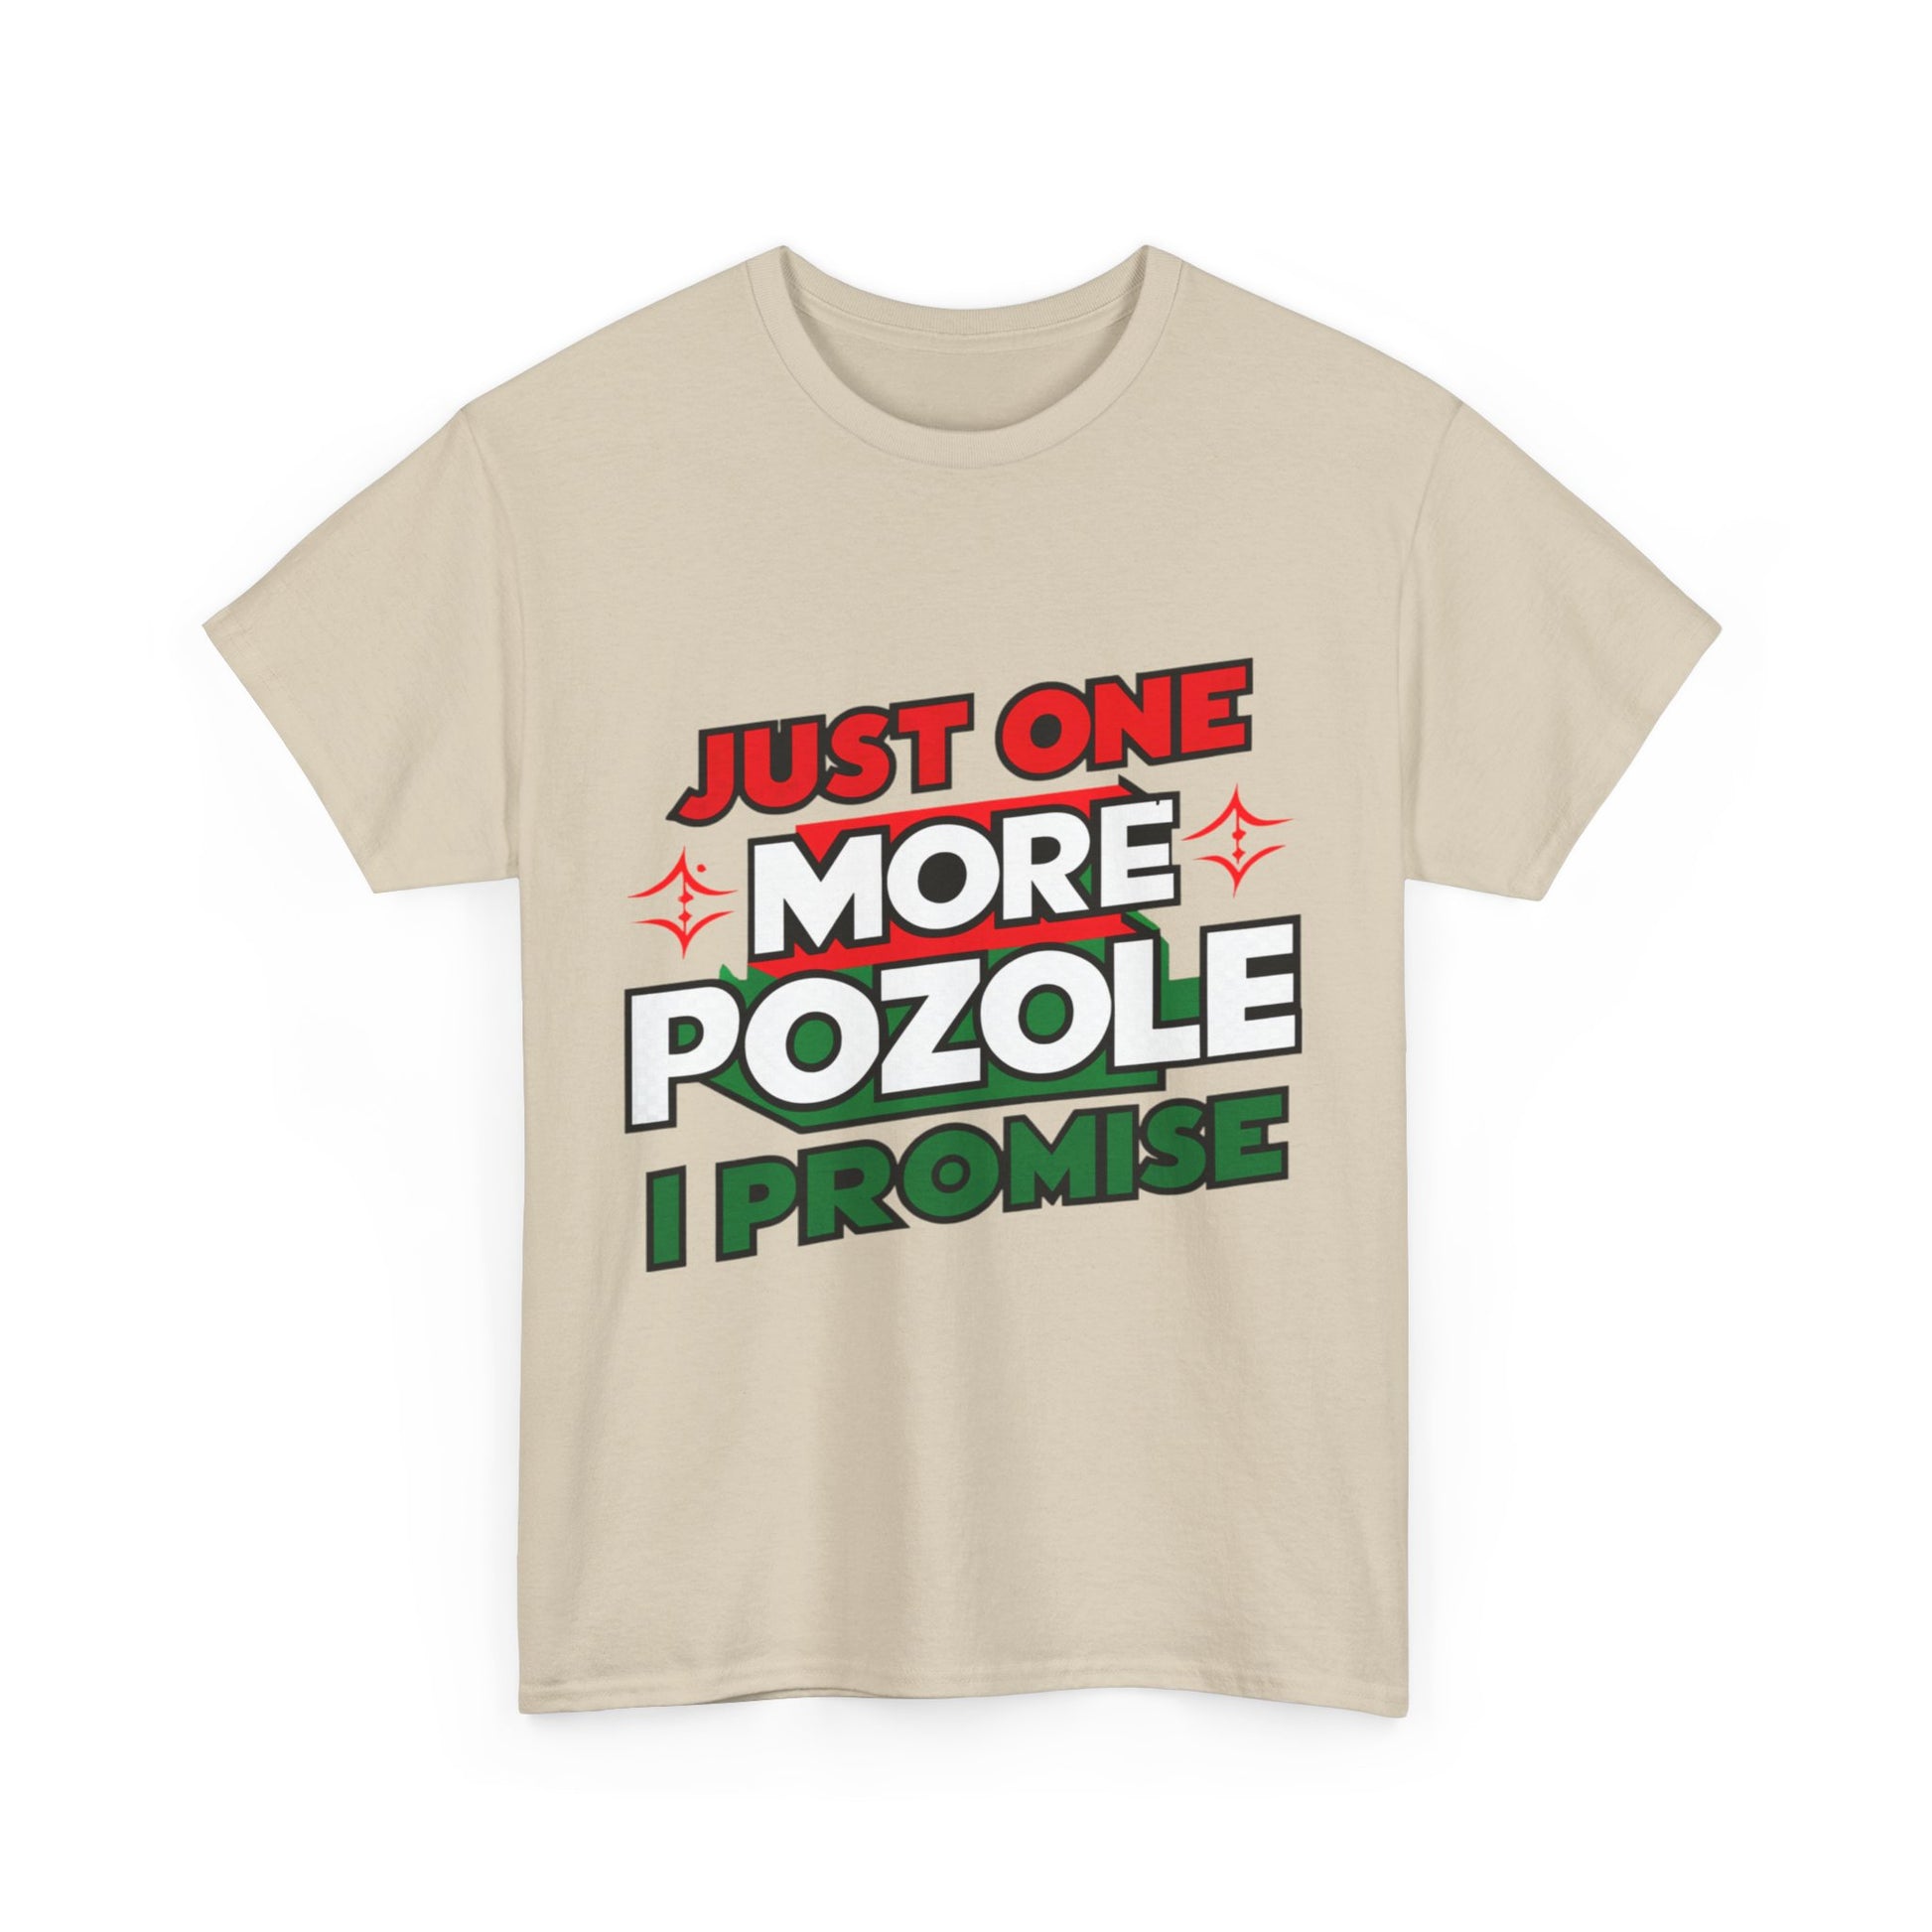 Just One More Pozole I Promise Mexican Food Graphic Unisex Heavy Cotton Tee Cotton Funny Humorous Graphic Soft Premium Unisex Men Women Sand T-shirt Birthday Gift-36